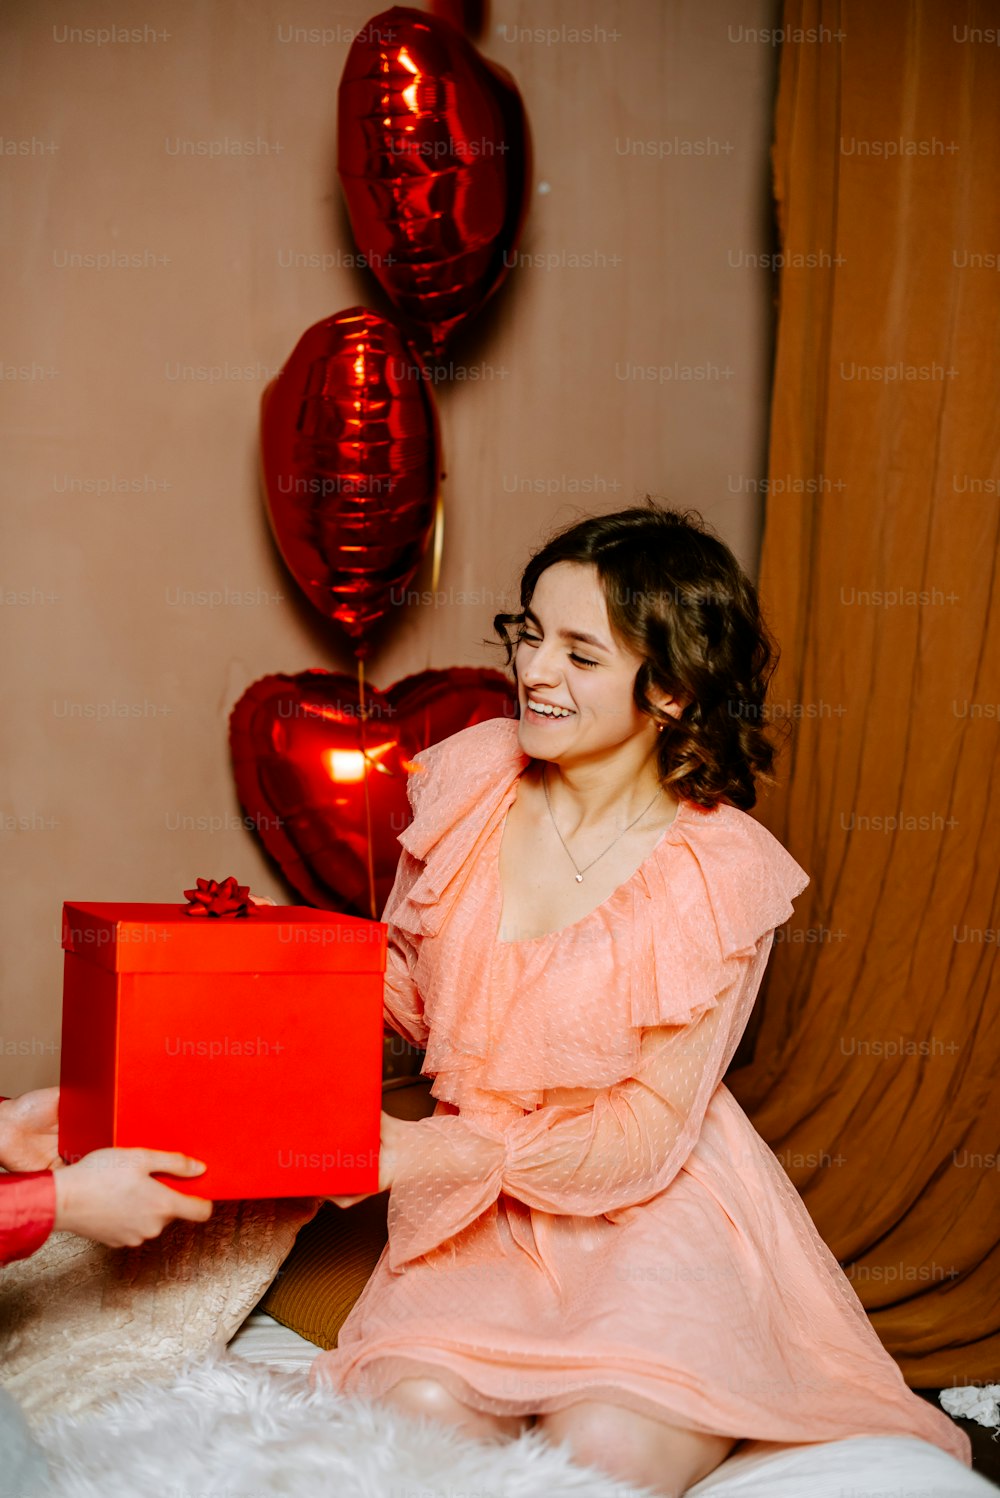 a woman in a pink dress holding a red box